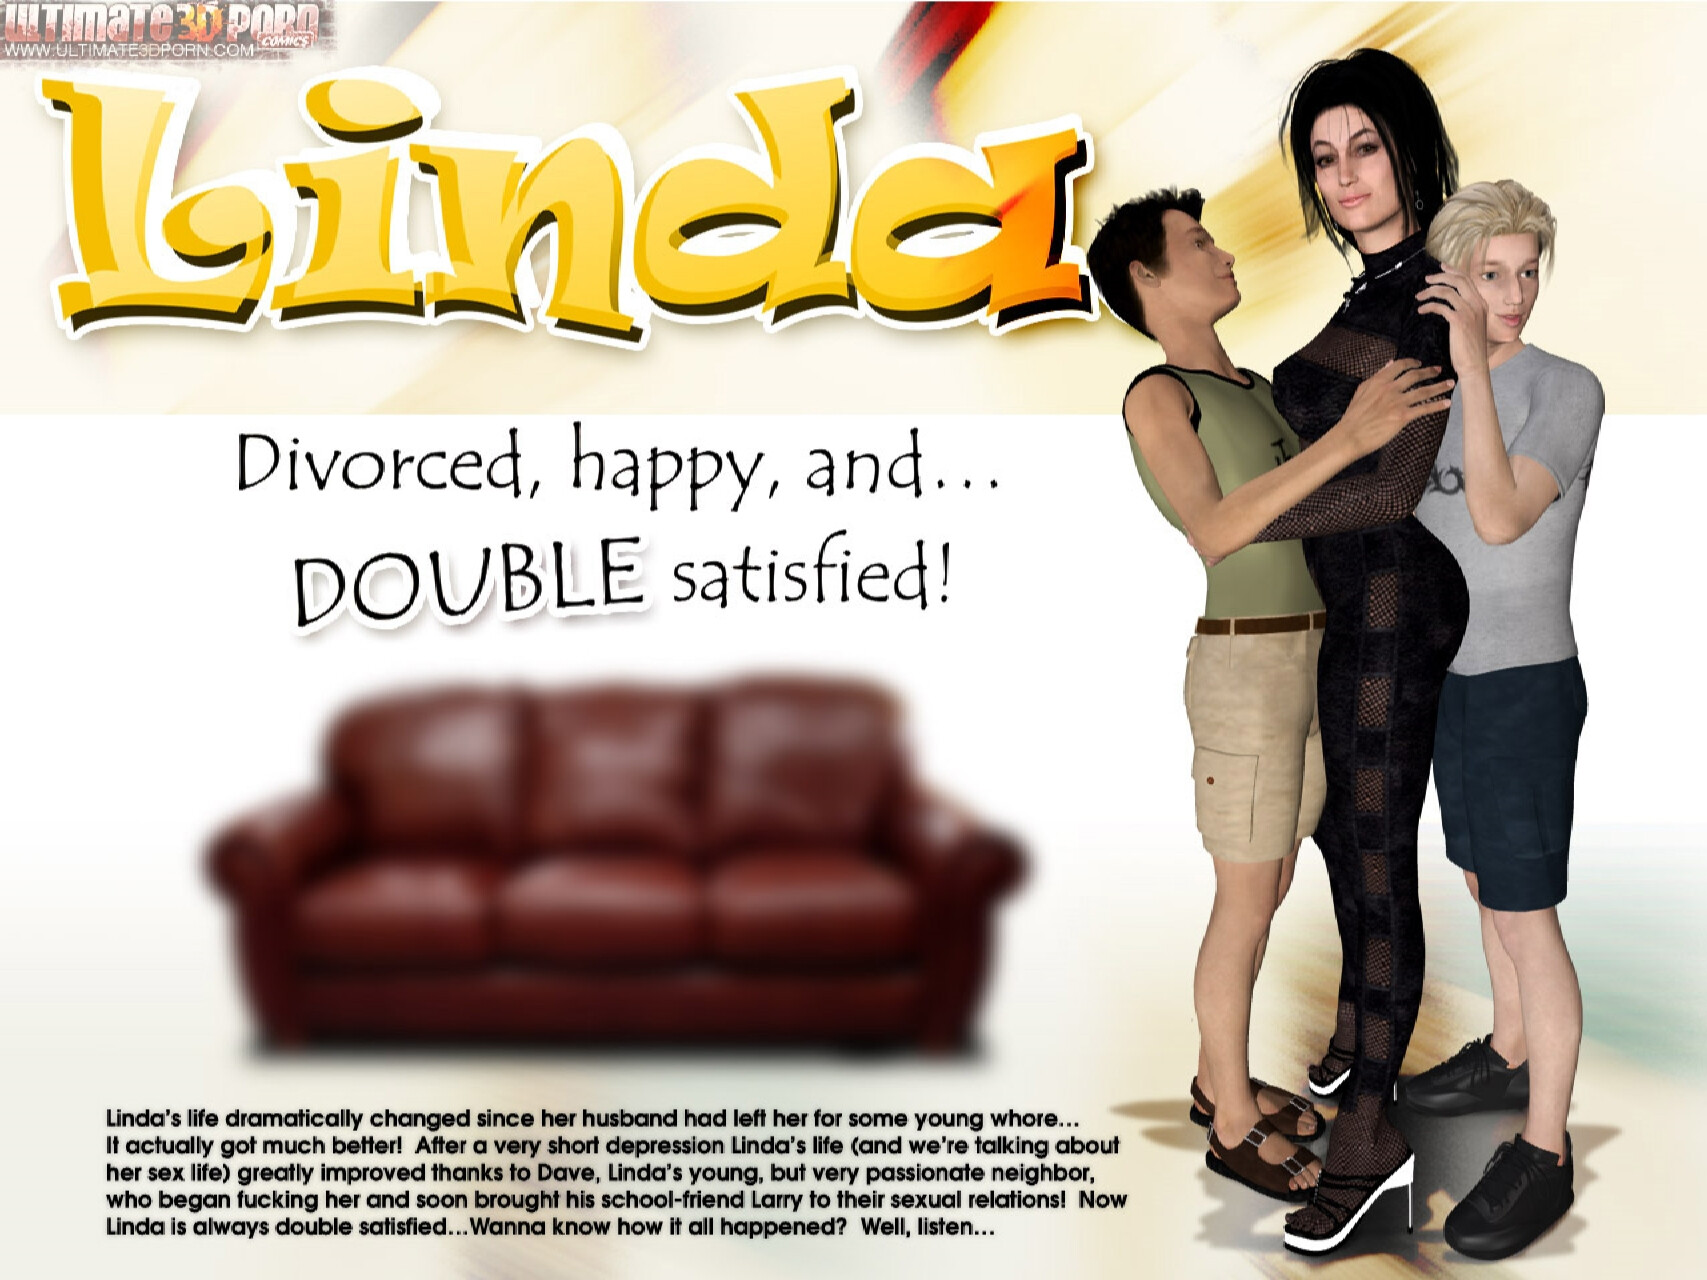 Linda 2 - Divorced, Happy, and...DOUBLE Satisfied! Main Image